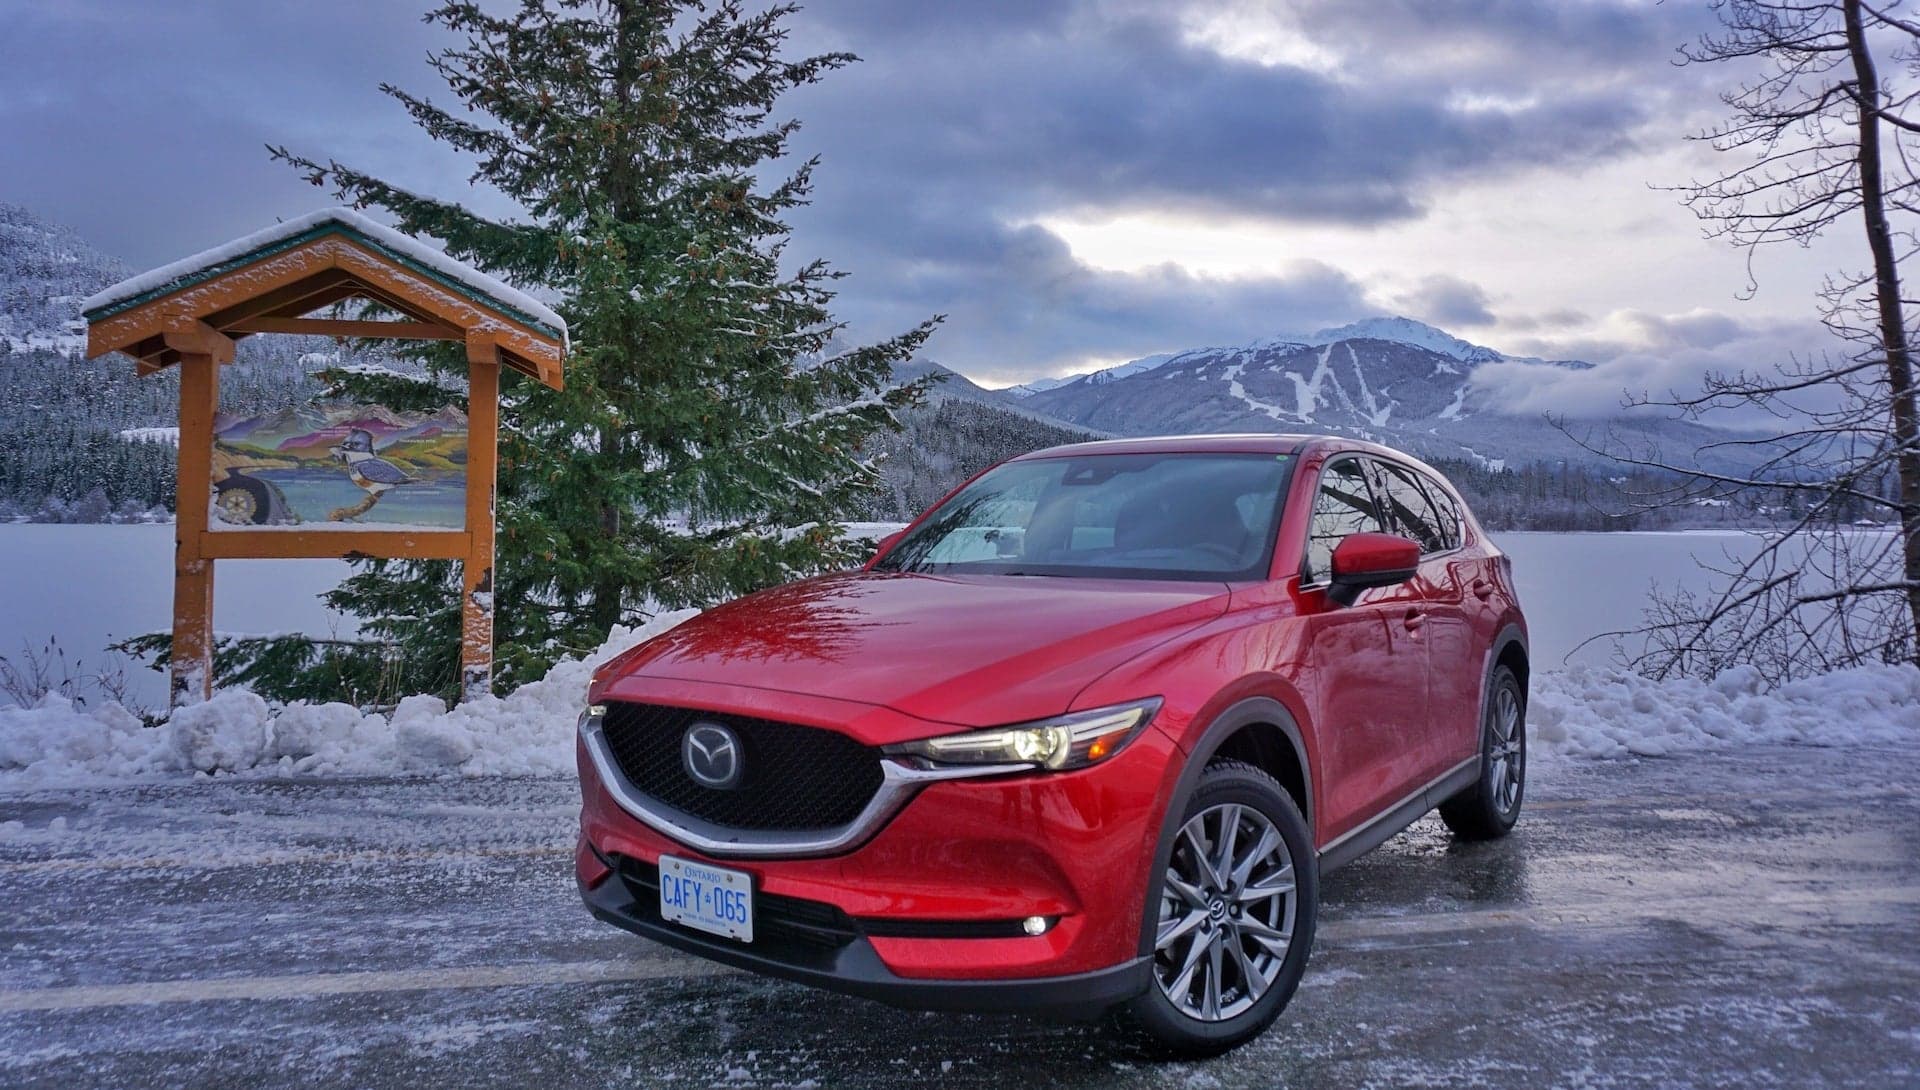 2019 Mazda CX-5 First Drive: Turbo Power and a Swanky Interior Take a Good Crossover to New Heights